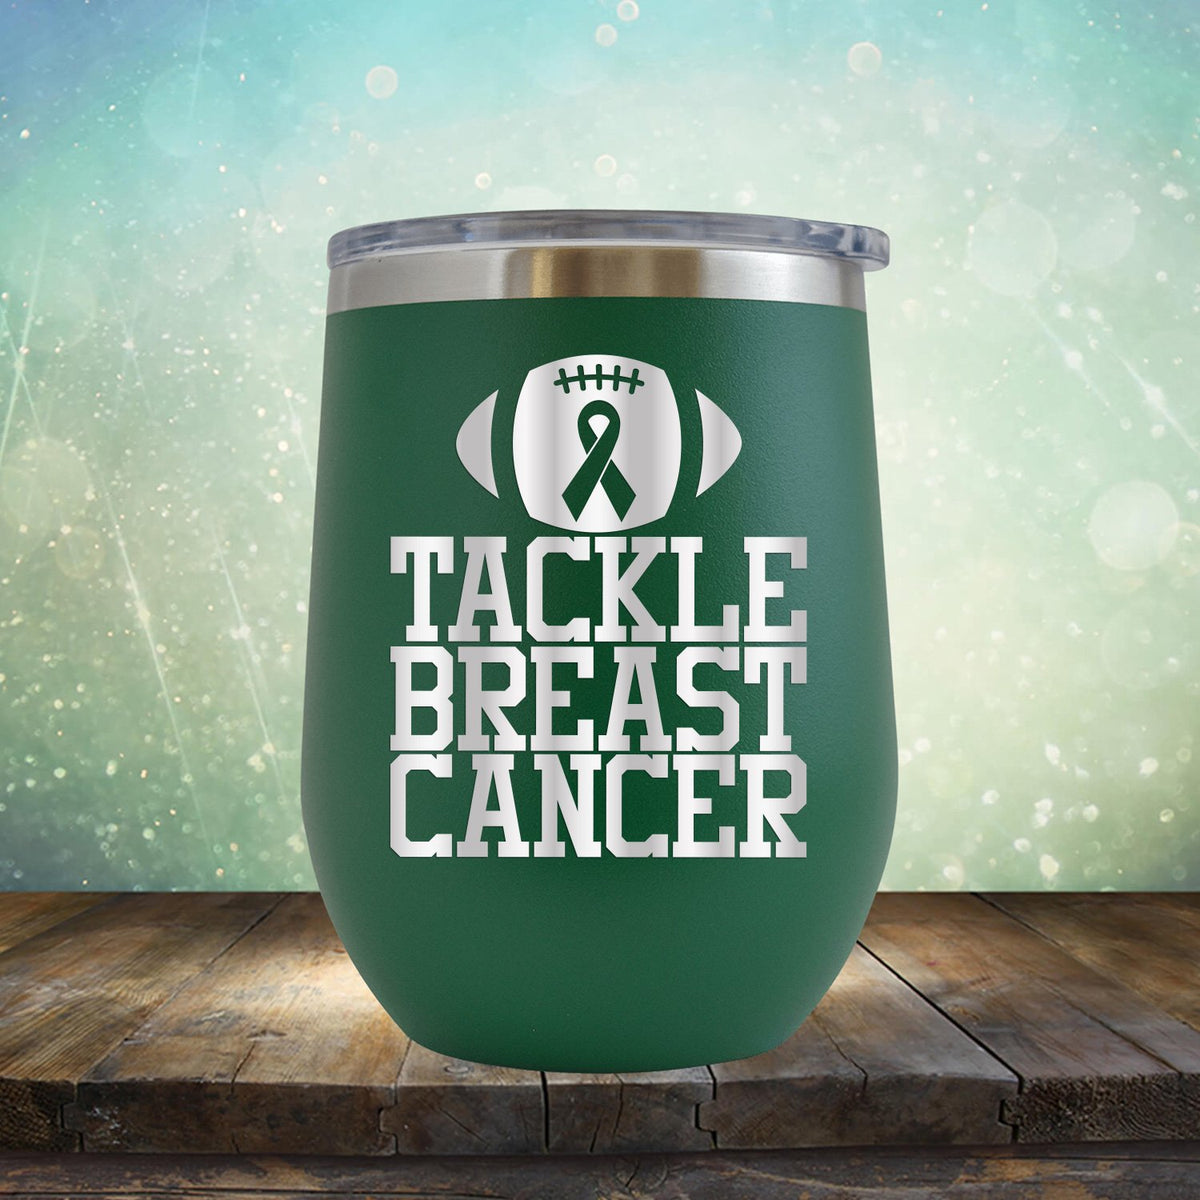 Tackle Breast Cancer - Wine Tumbler